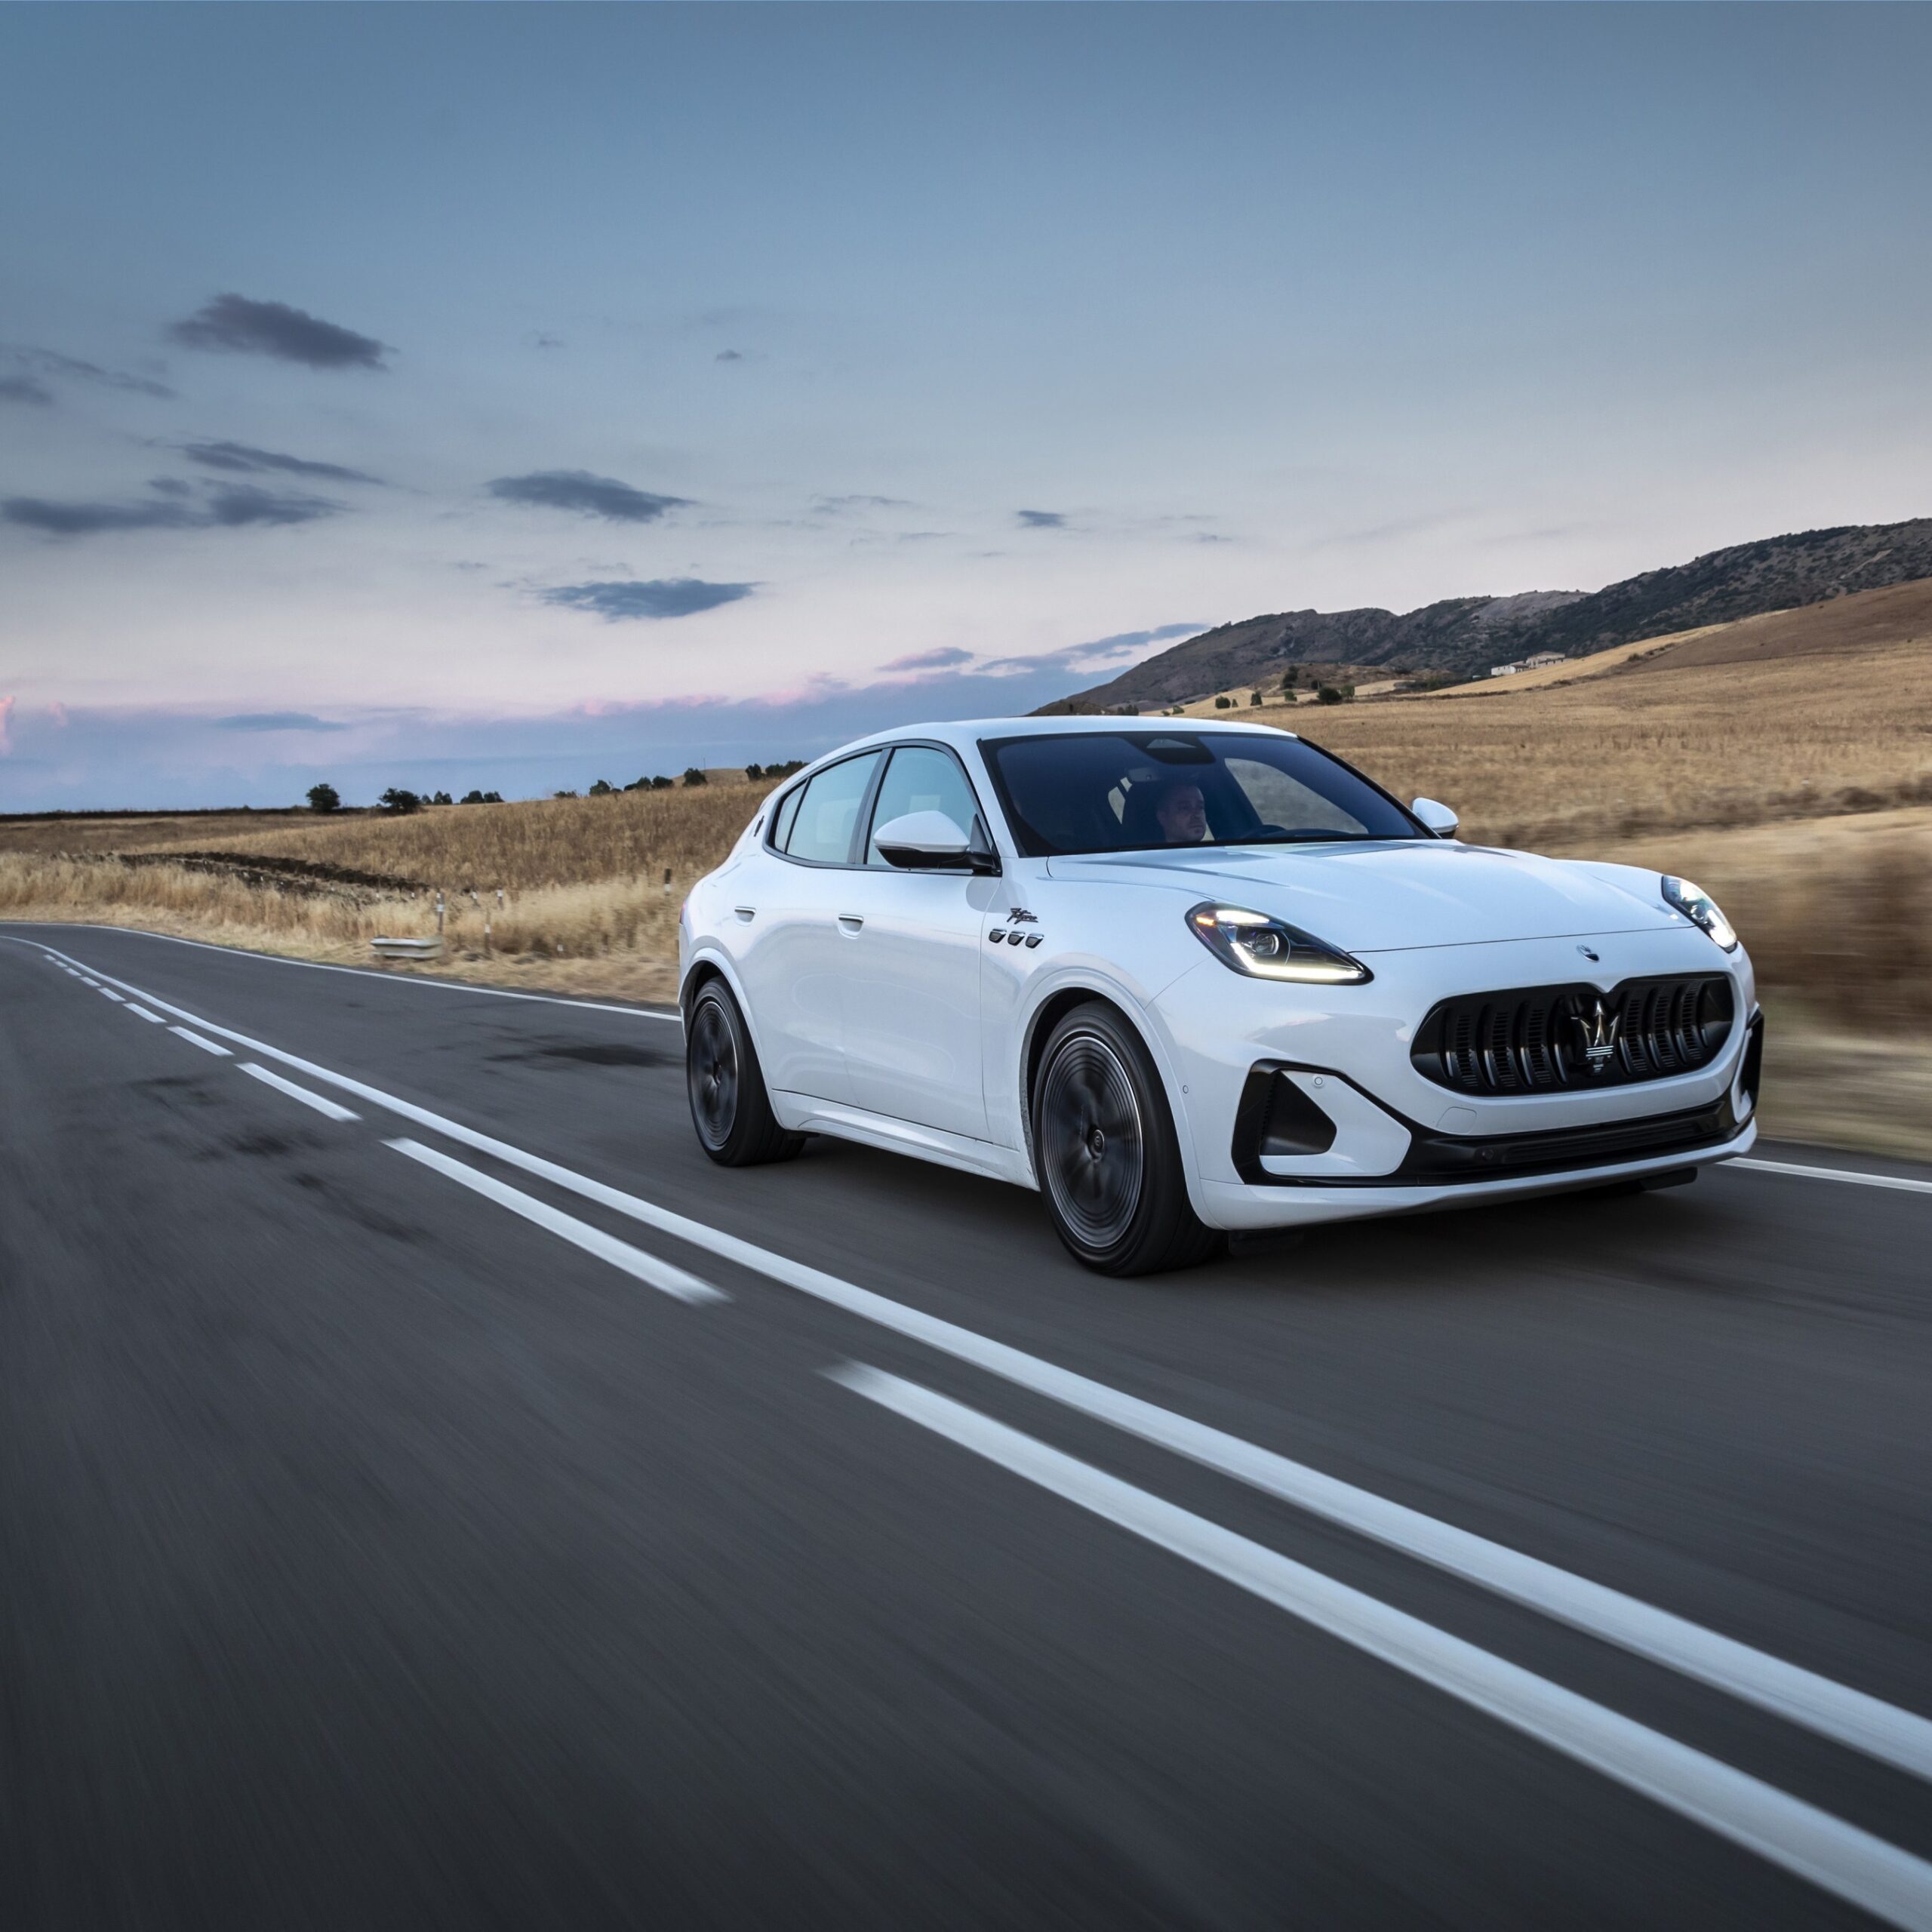 Bridgestone partners with Maserati to develop bespoke 20-inch Potenza Sport ENLITEN tires for the all-electric Grecale Folgore SUV, enhancing performance and sustainability with innovative technology.